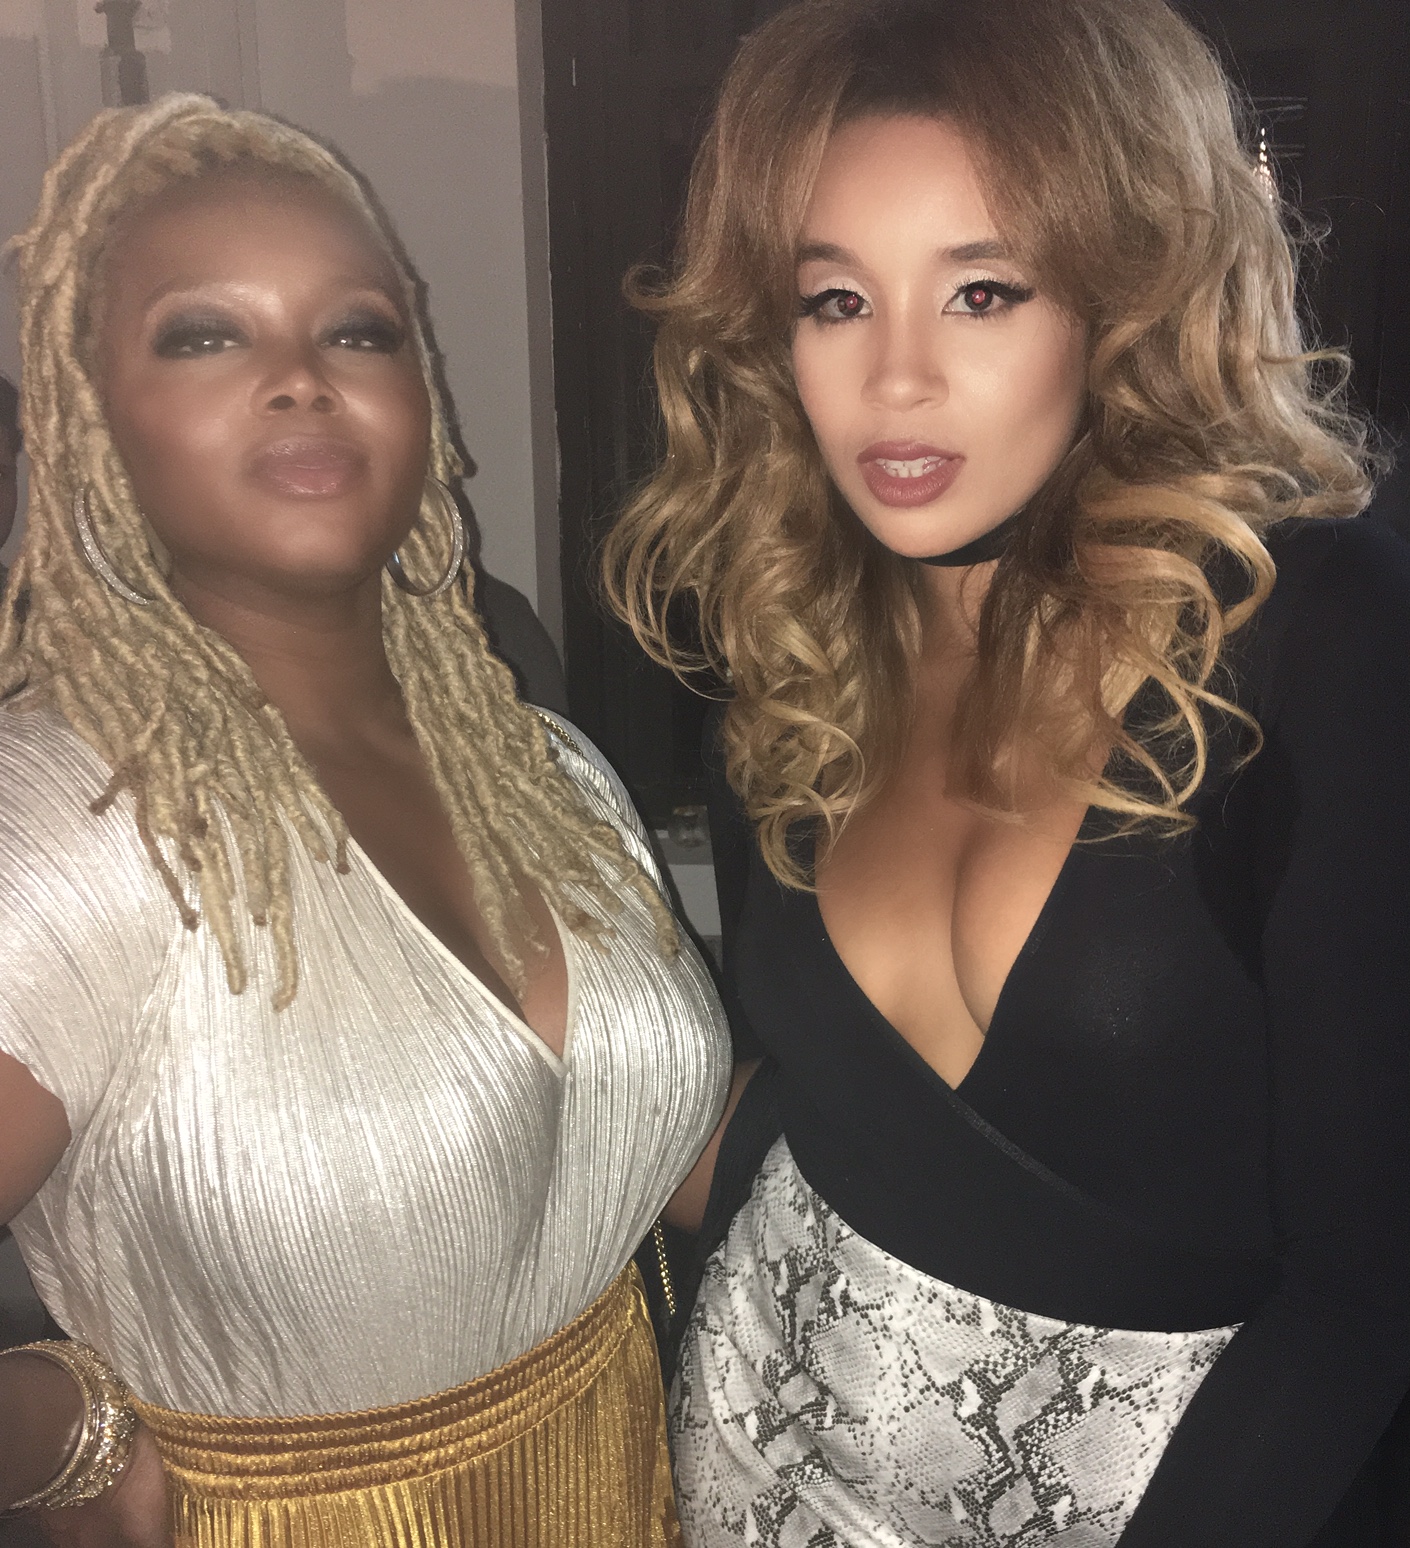 lionbabe-try-on-metallics-with-a-silver-zara-top-dez-deme-pleated-gold-skirt-and-fendi-sandals-party